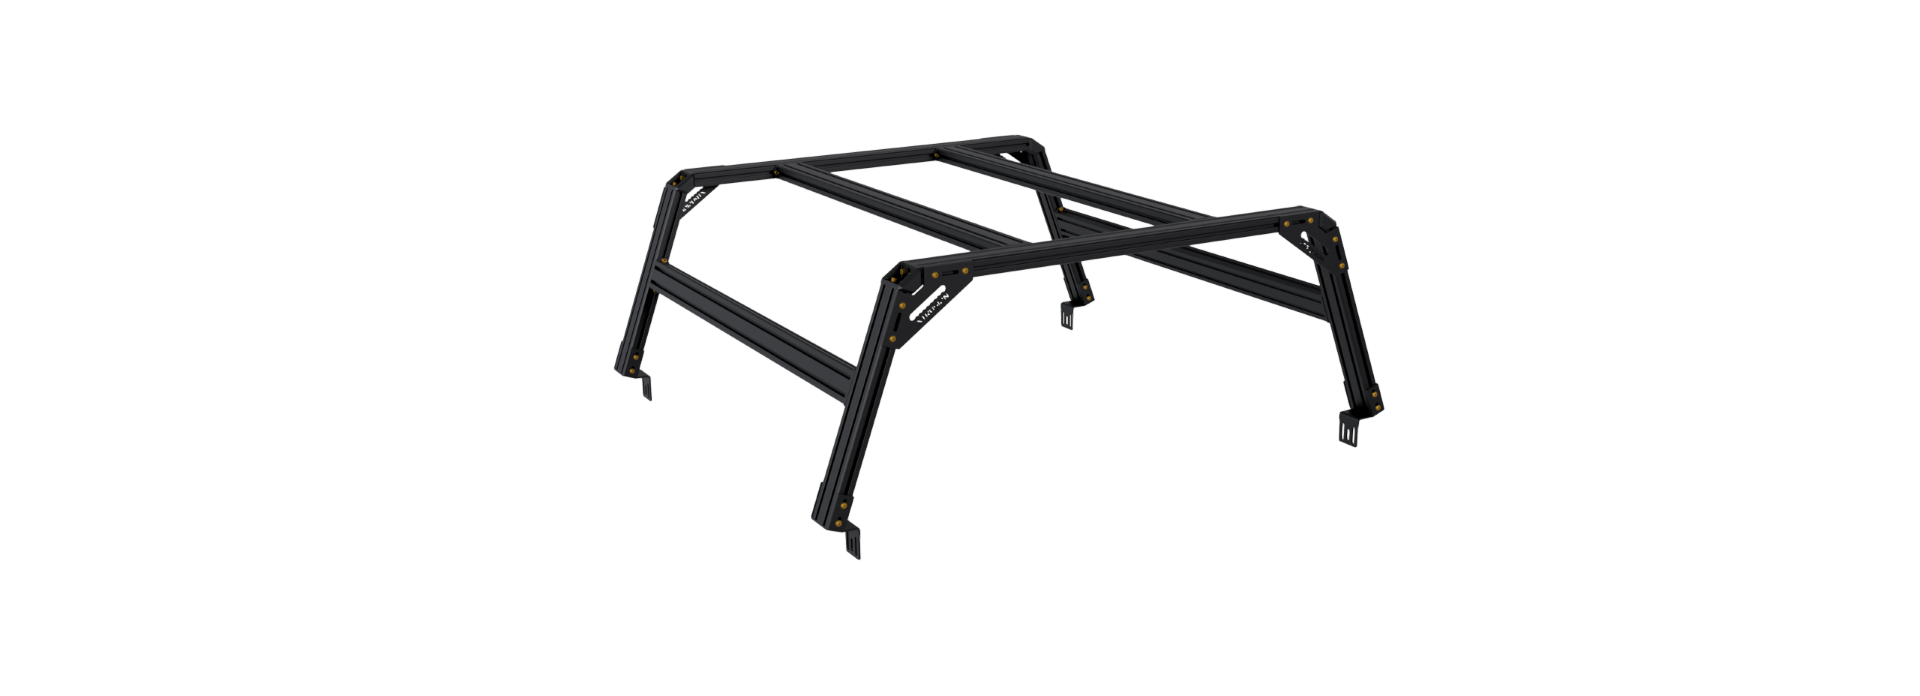 XTR1 Build-Your-Own Bed Rack - Ford F-250 & F-350